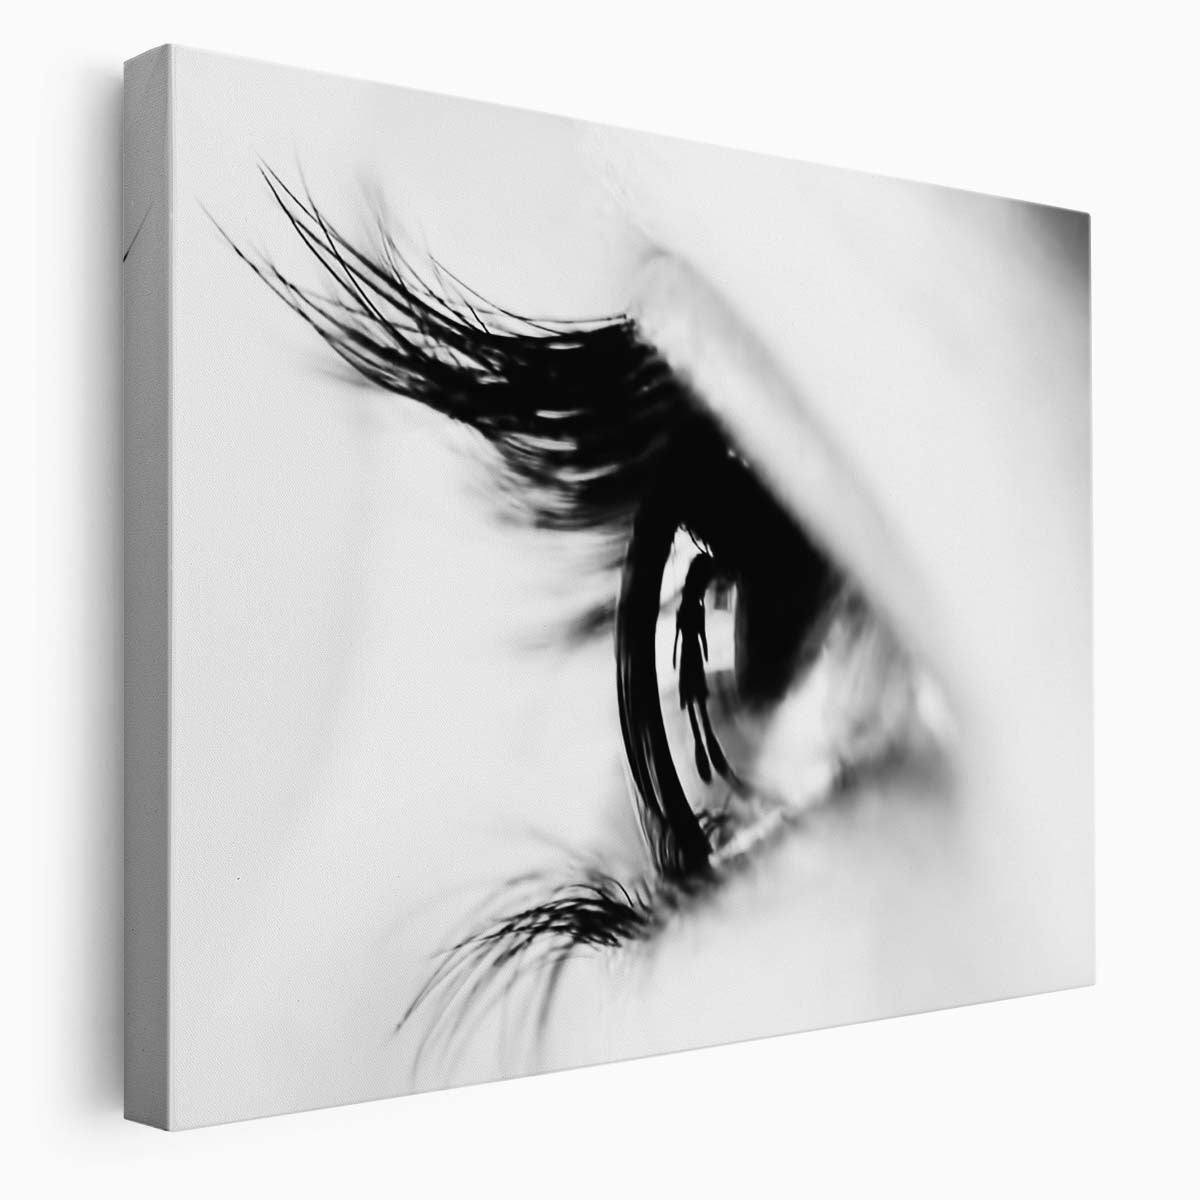 Monochrome Macro Girl Eye Reflection Wall Art by Luxuriance Designs. Made in USA.